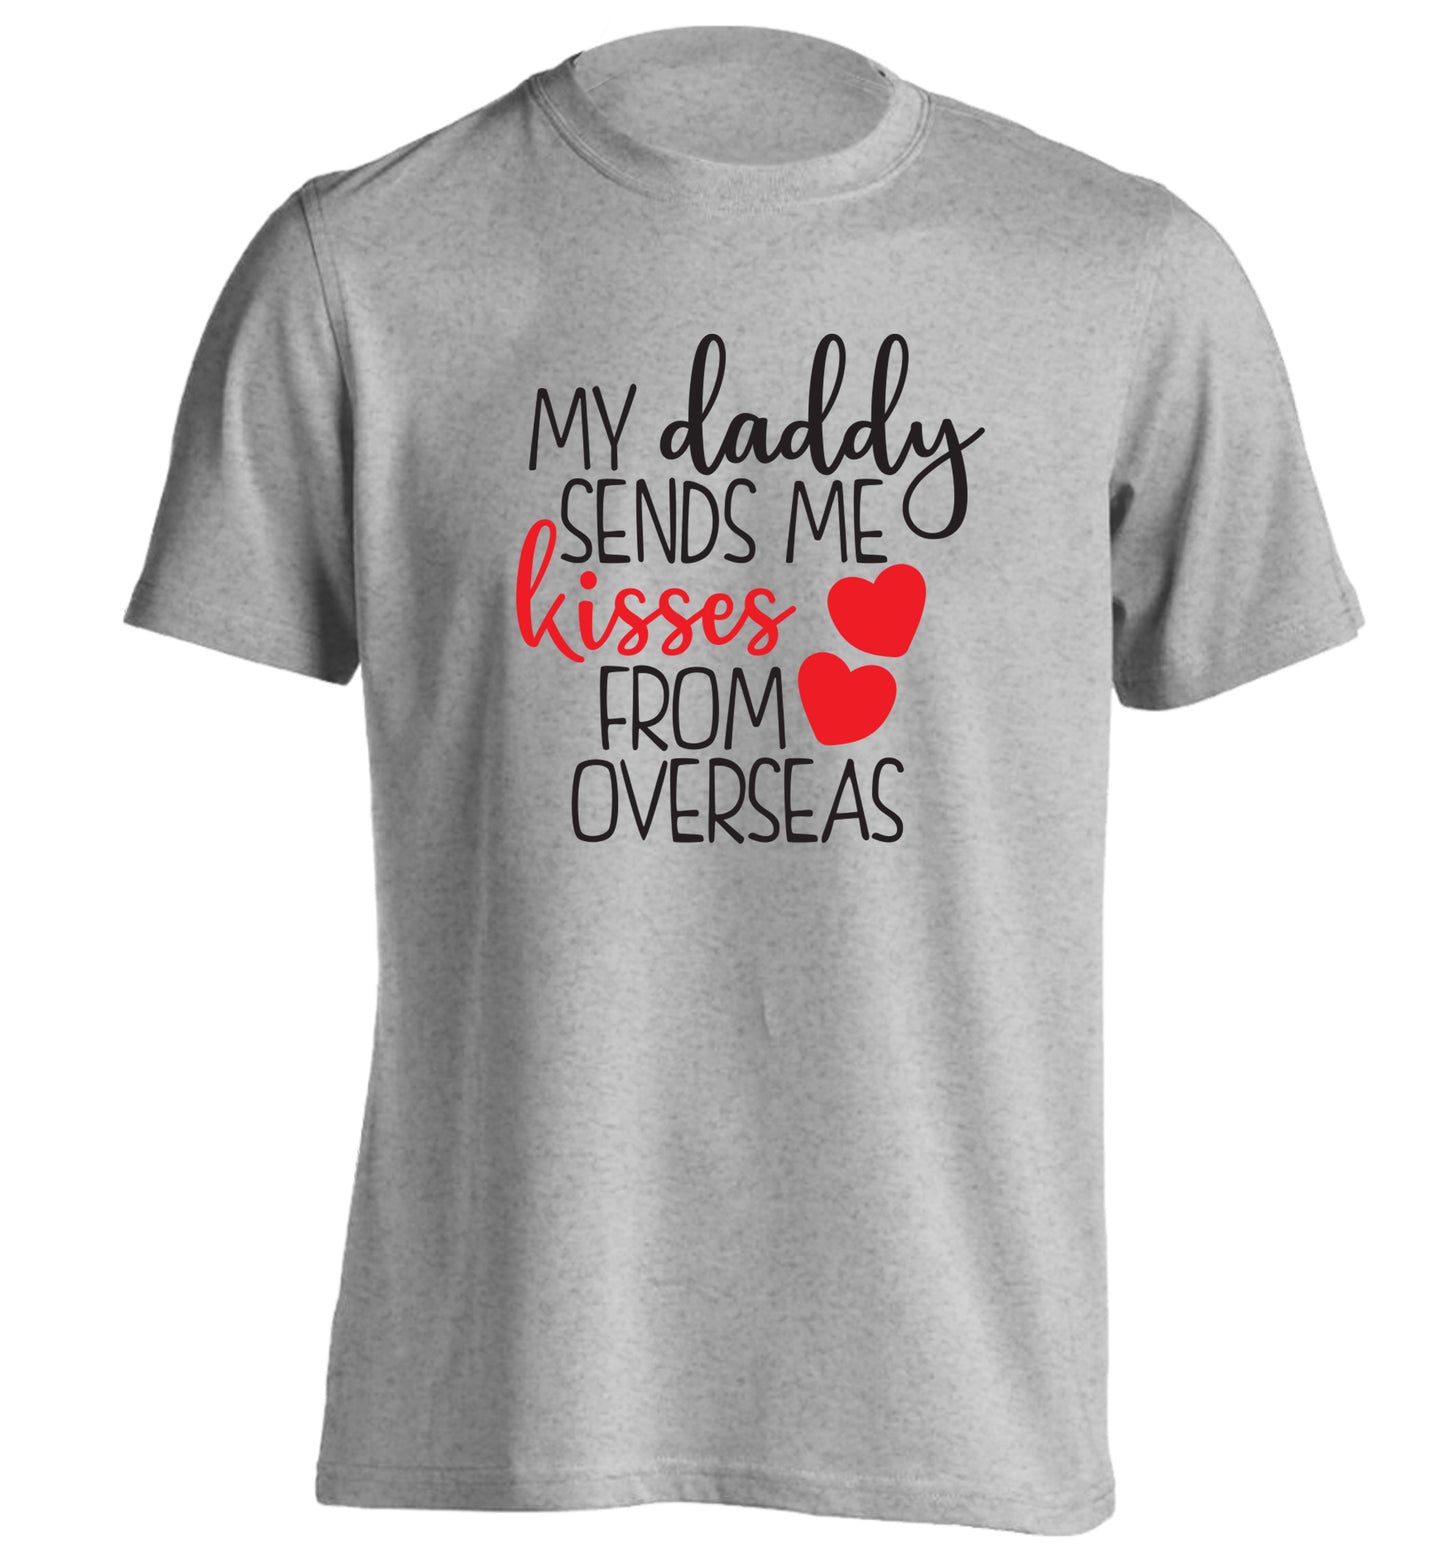 My daddy sends me kisses from overseas adults unisex grey Tshirt 2XL